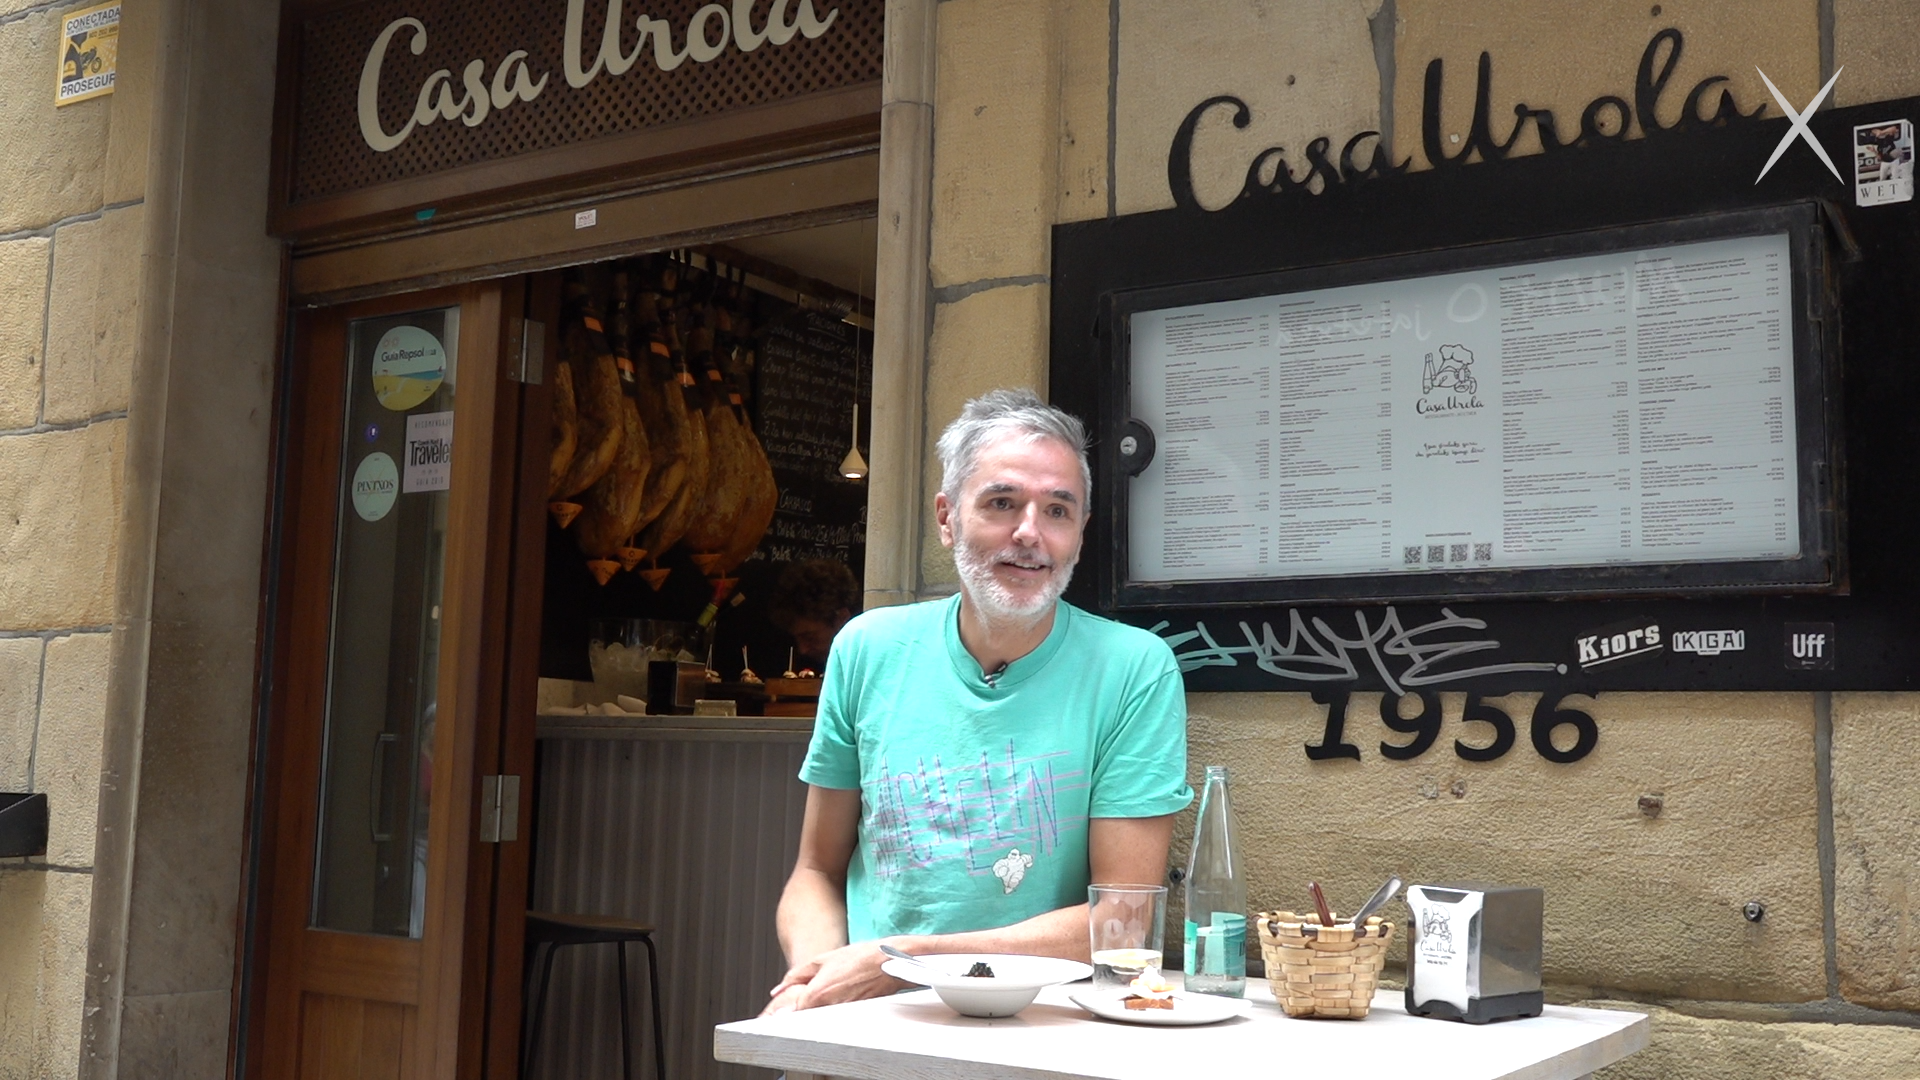 Mikel López Iturriaga: “Even if I´m from Bilbao, I recognize San Sebastian is the world city for pintxos”